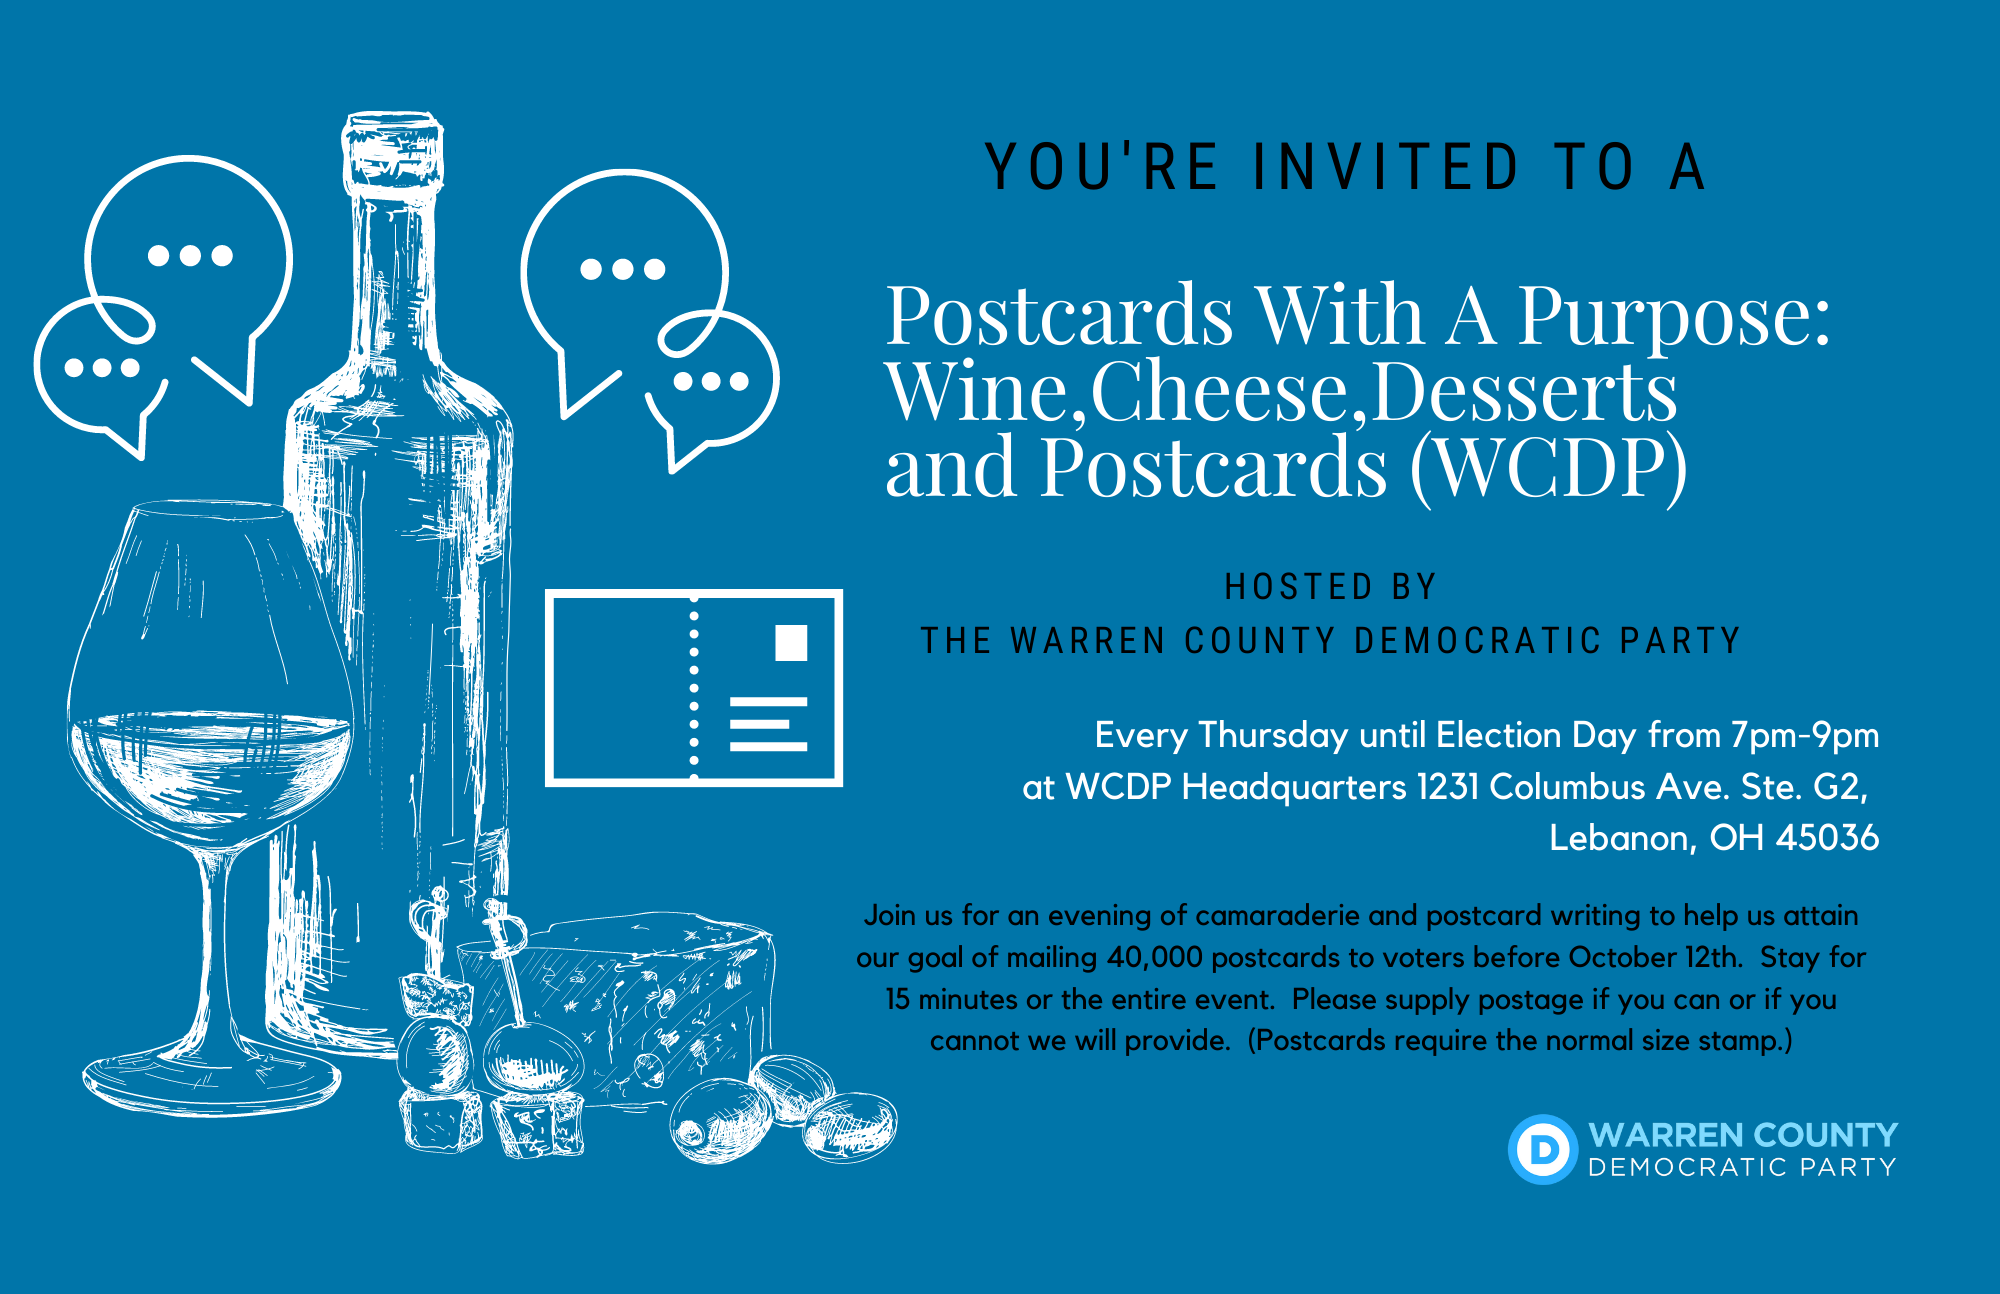 Wine, Cheese, Desserts, and Postcards - Every Thursday 7pm until Election Day